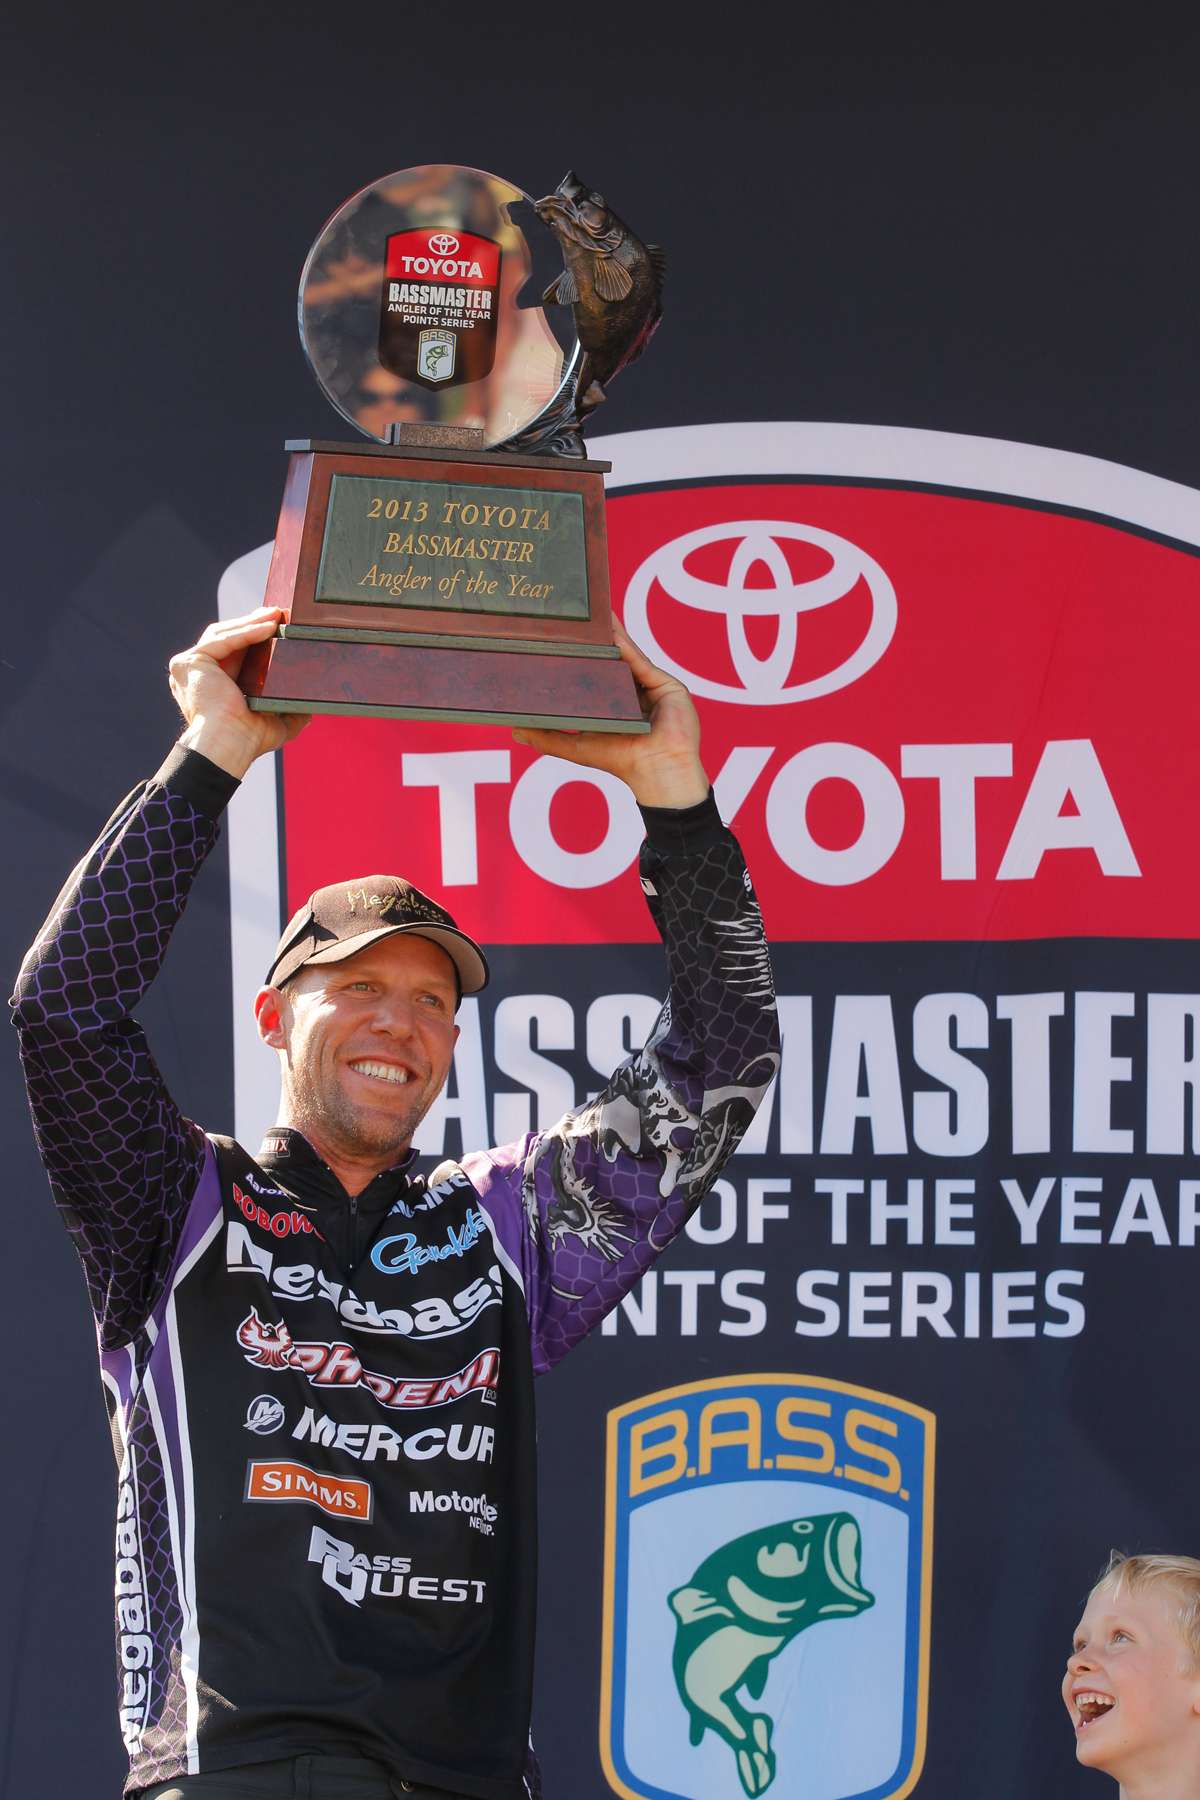 In 2013, Aaron Martens started the season with an 85th place finish at the Sabine River. Even so, he came back to win the Toyota Bassmaster Angler of the Year (AOY) title. Before that happened, the general rule was you couldn't afford to miss a Top 50, two-day cut and expect to have a shot.